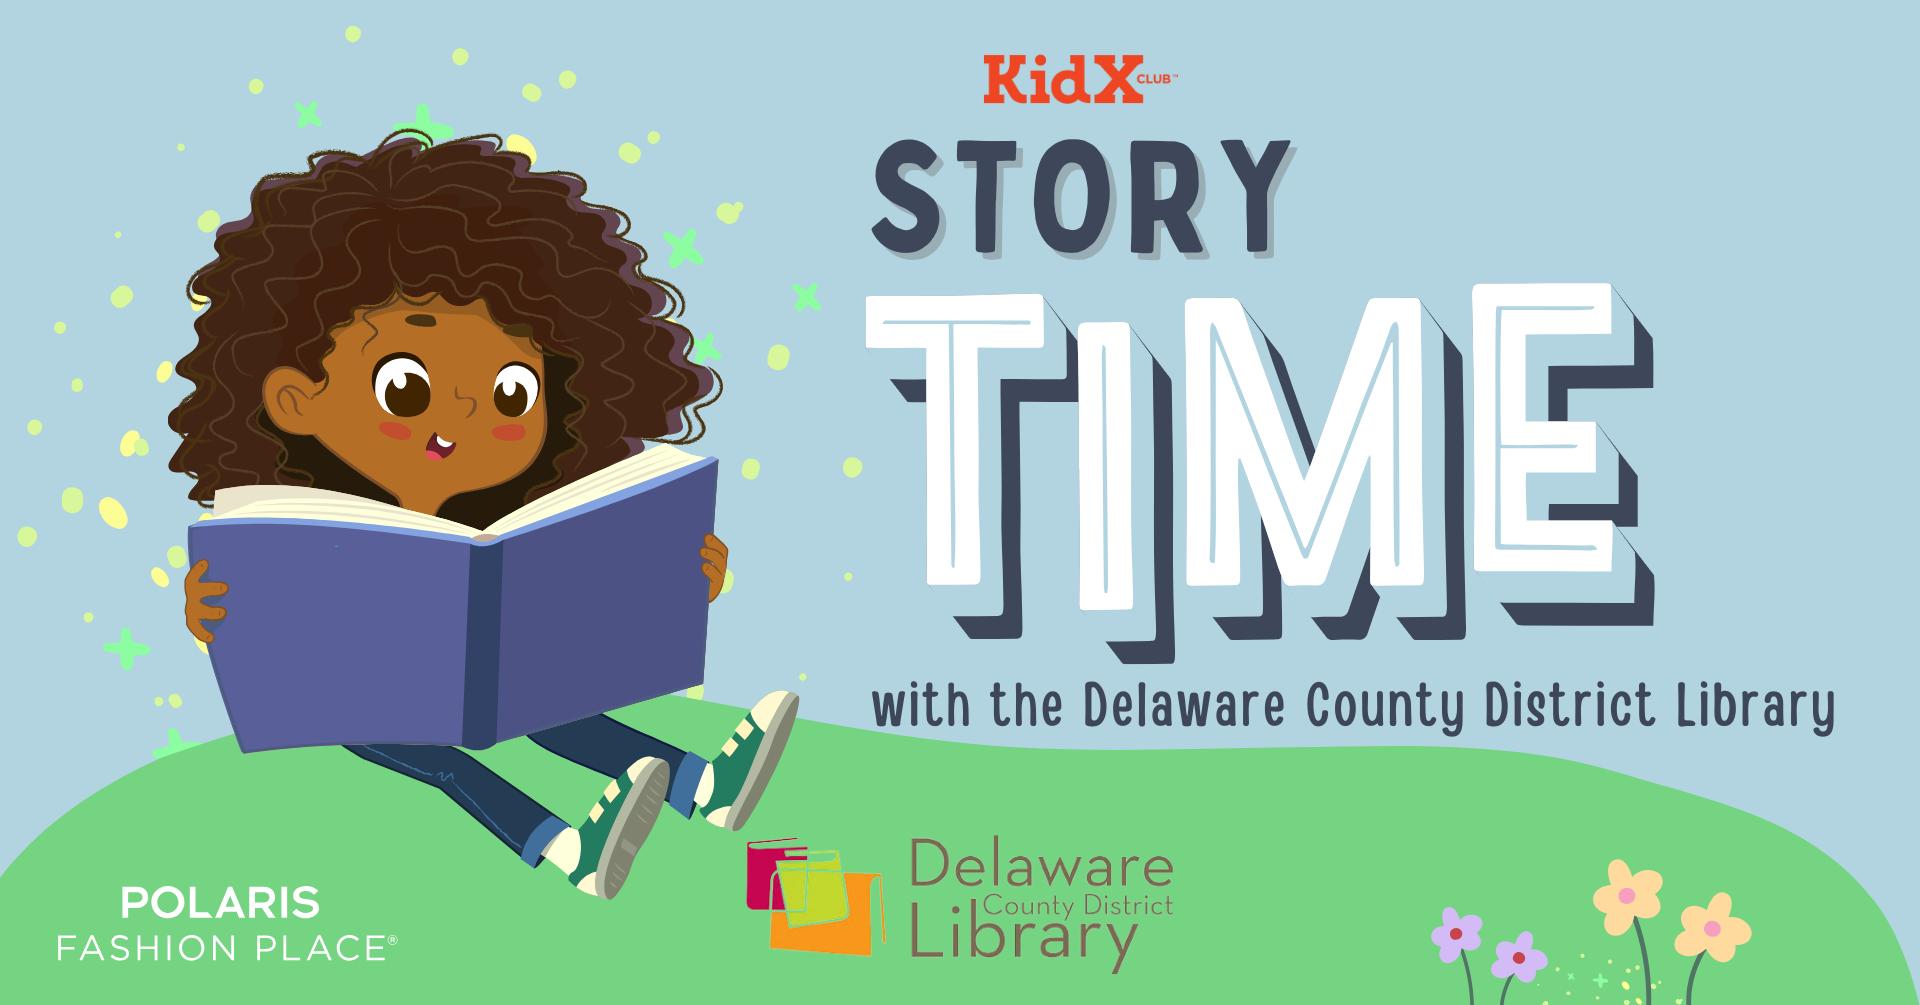 KidX Storytime with the Delaware County District Library